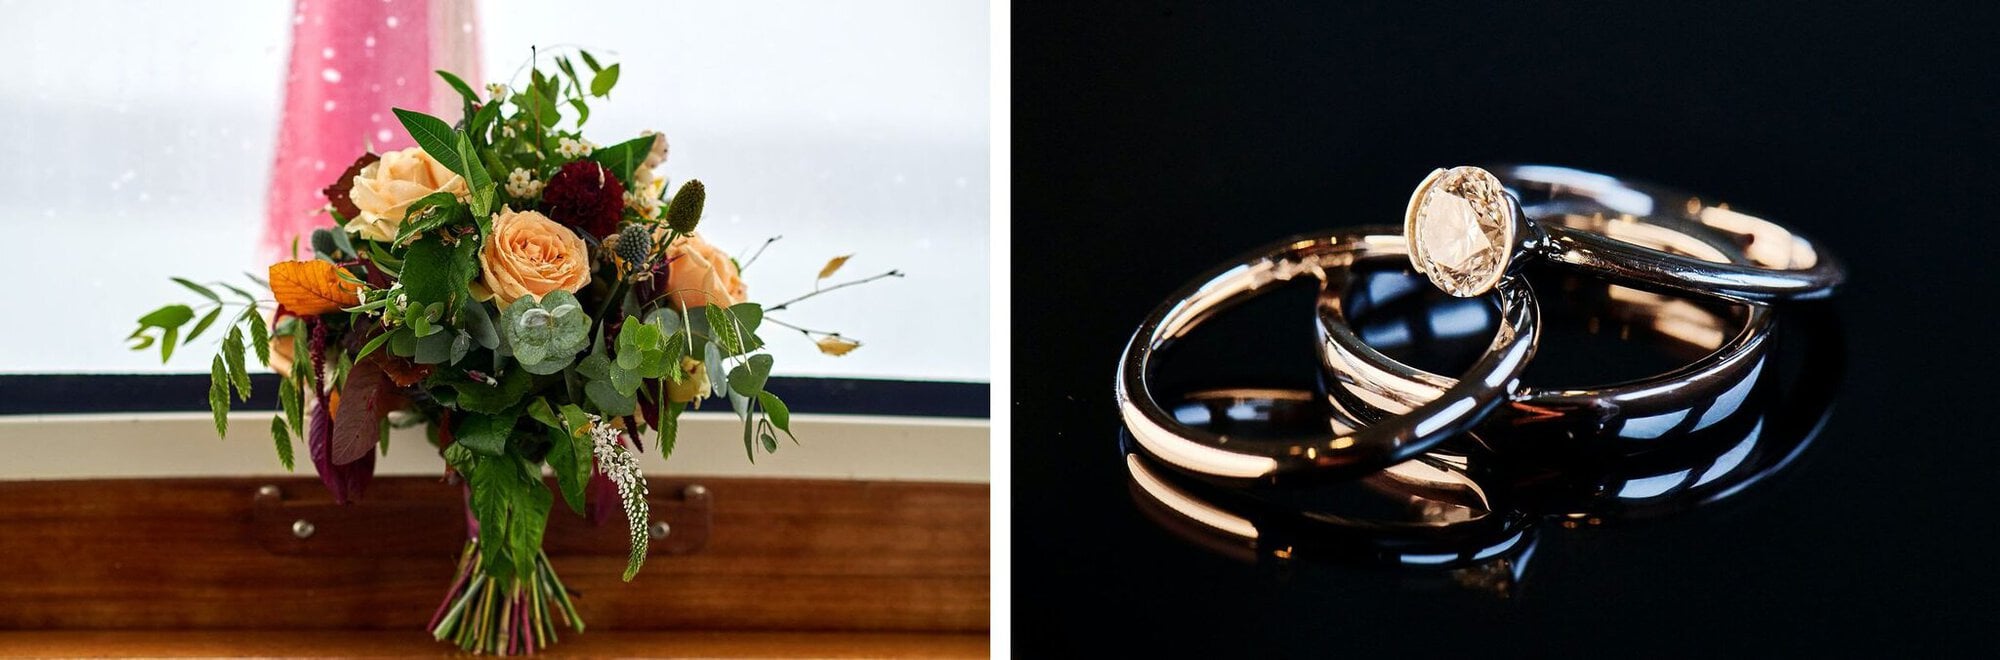 Flowers and wedding rings on the Dorset Queen boat, Poole